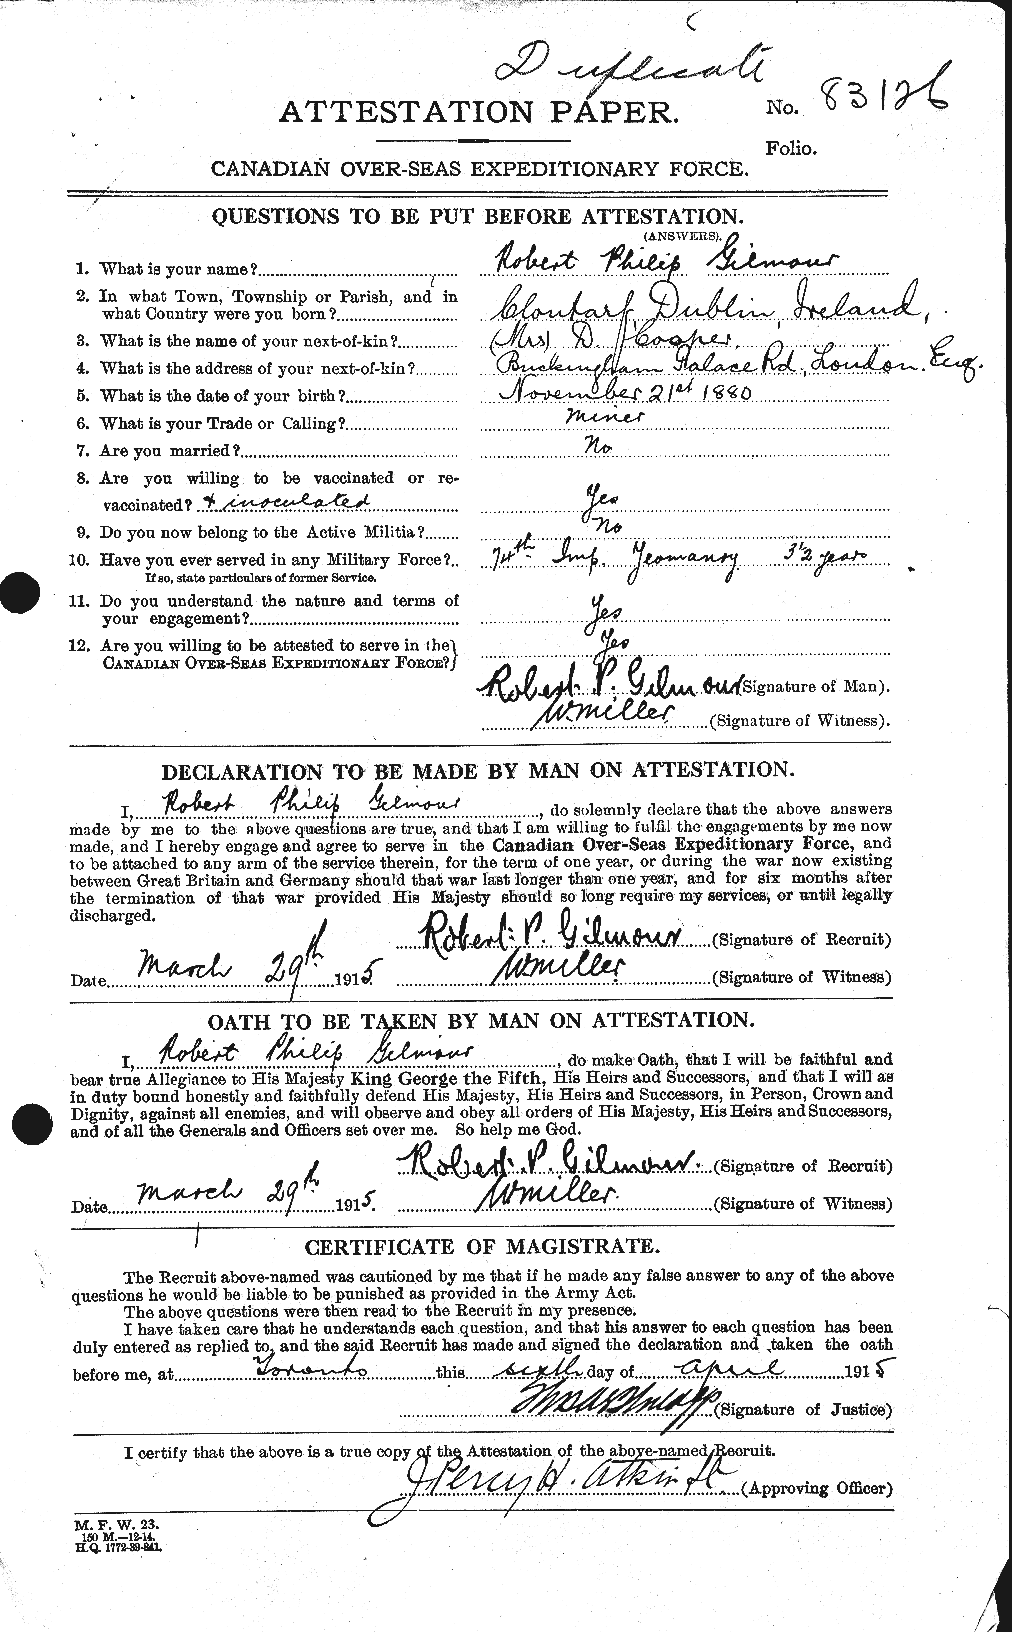 Personnel Records of the First World War - CEF 350994a